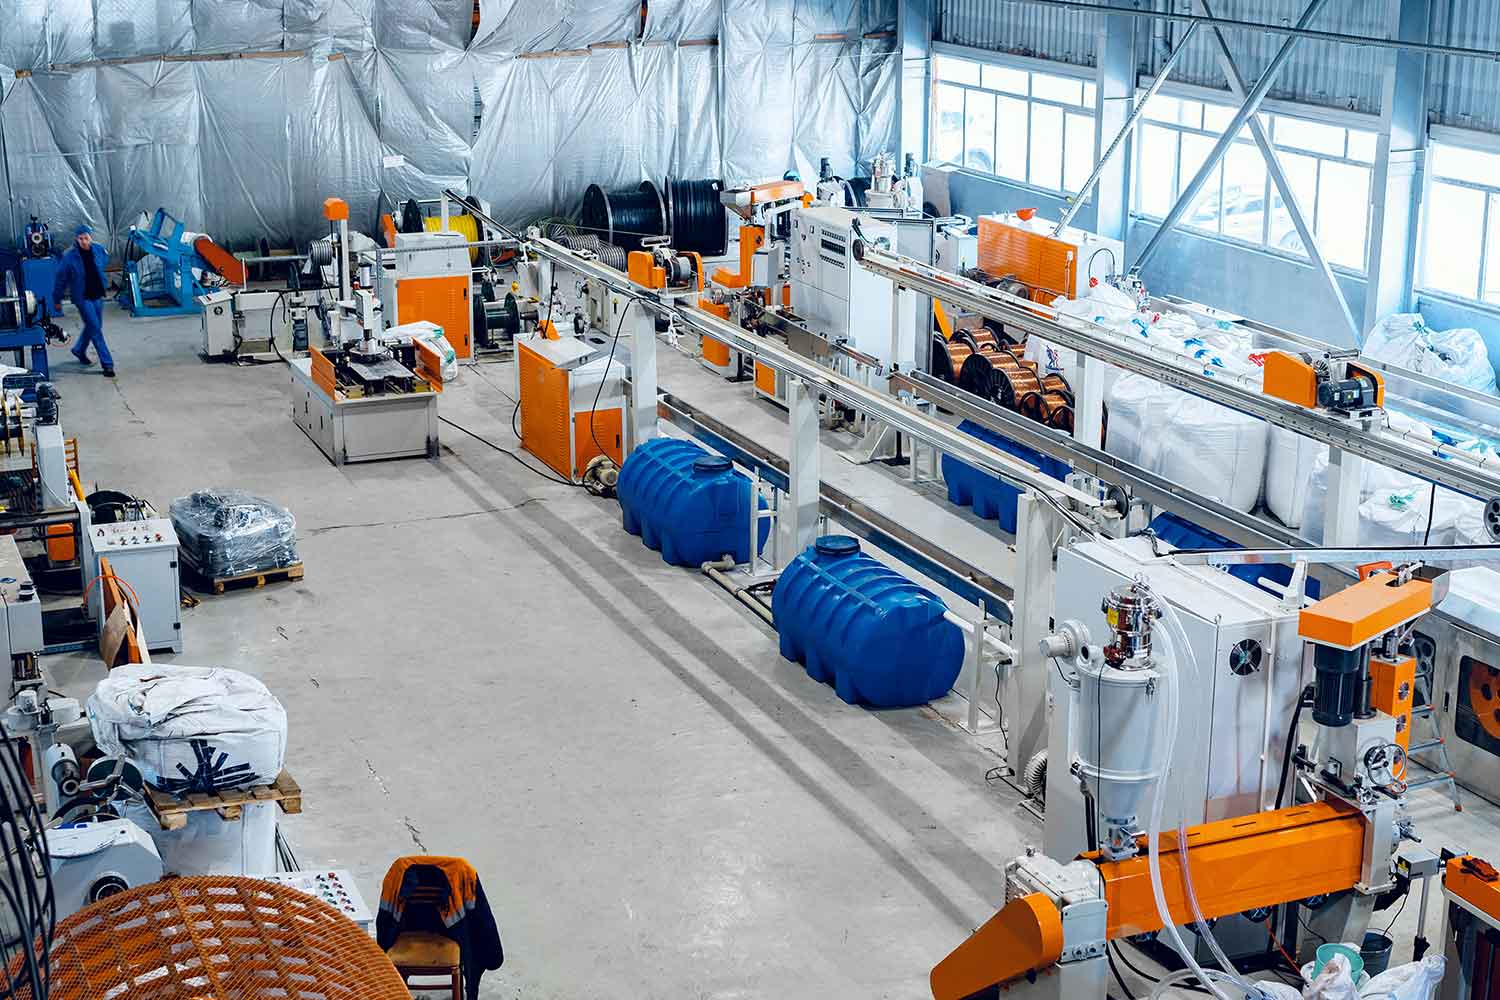 Example of one production facility at an electronics manufacturer using Infor’s Multi-Asset Management capabilities